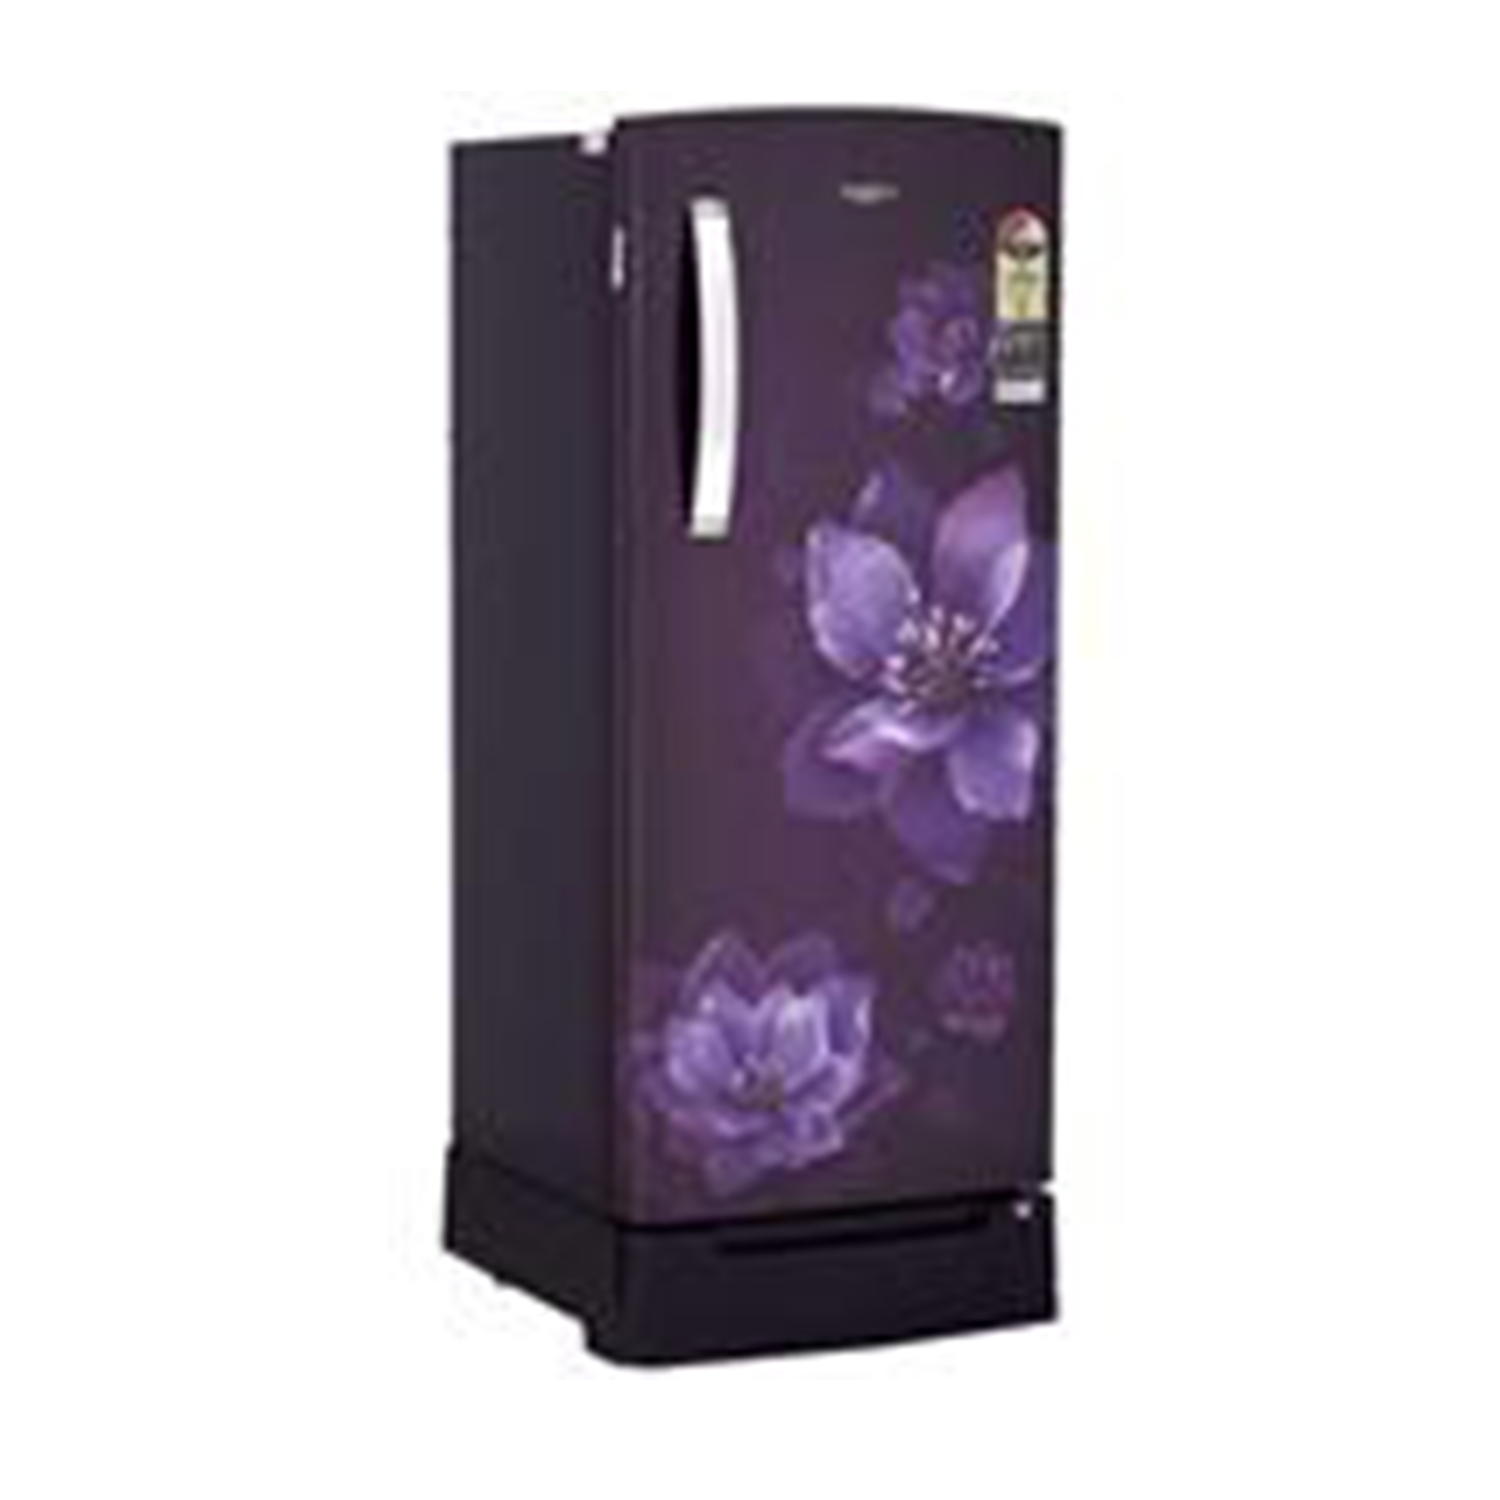 Whirlpool Ice Magic Pro 200 Litres 3 Star Direct Cool Single Door Refrigerator with Magic Chiller Zone (Purple)